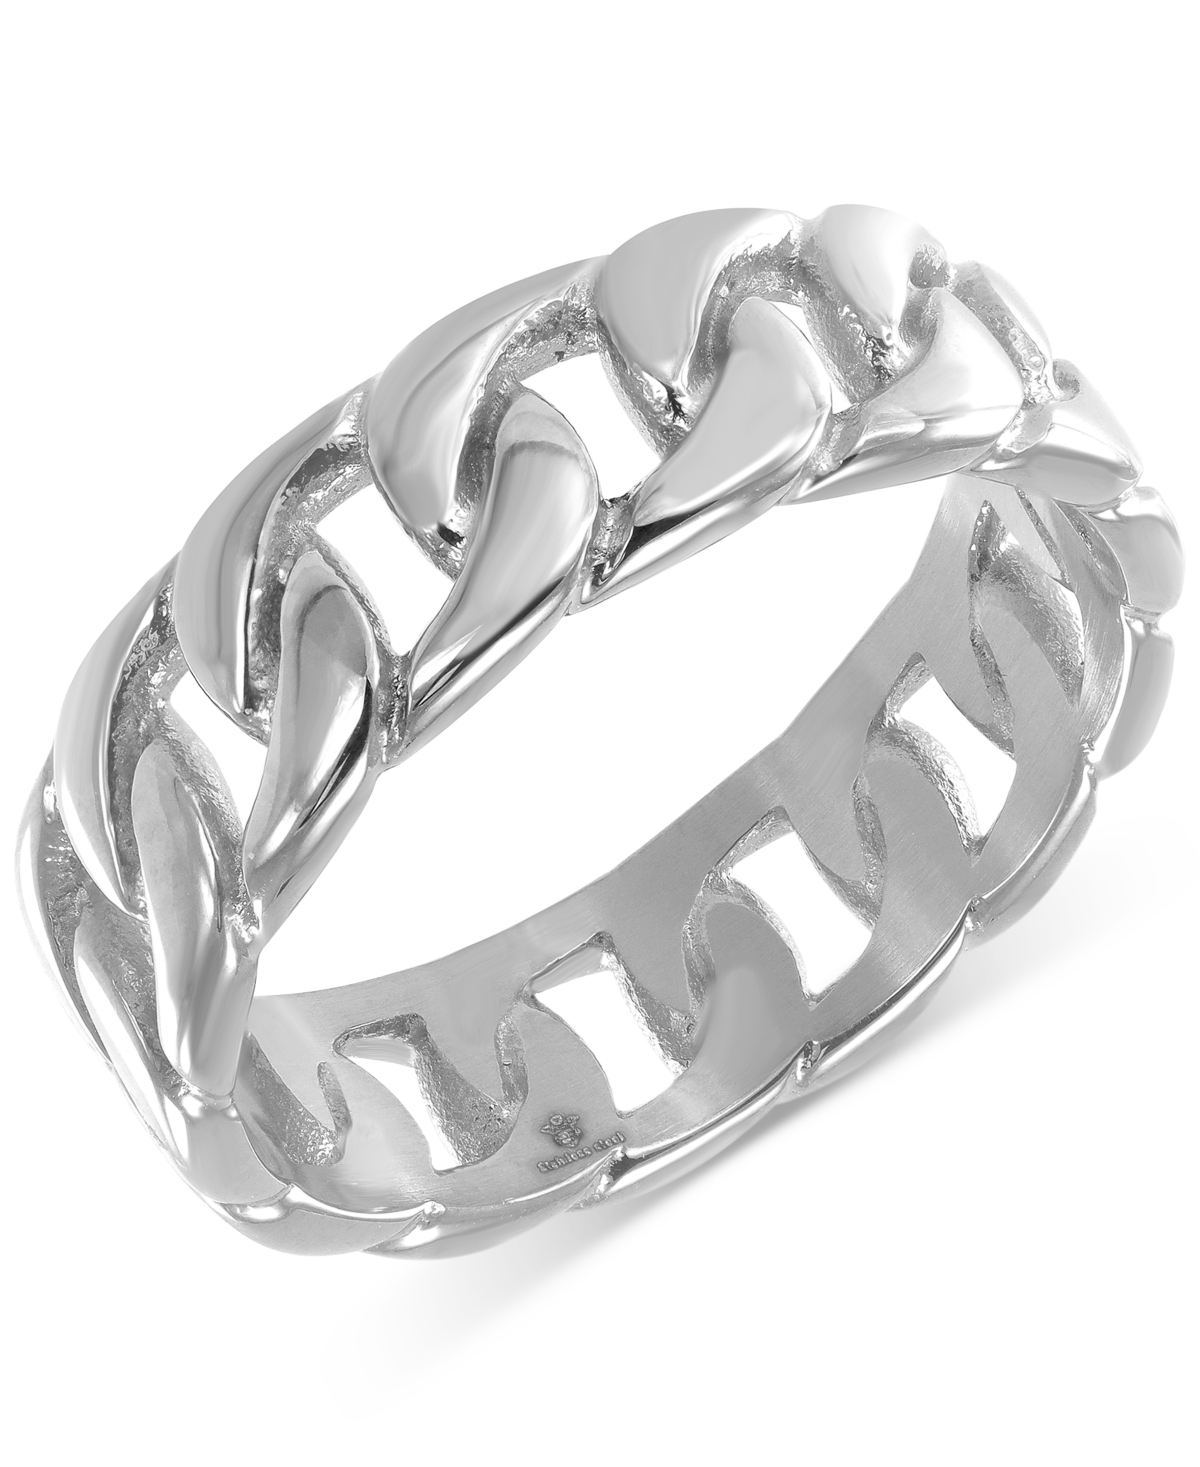 Men's Cuban Chain Link Band in Stainless Steel - Black